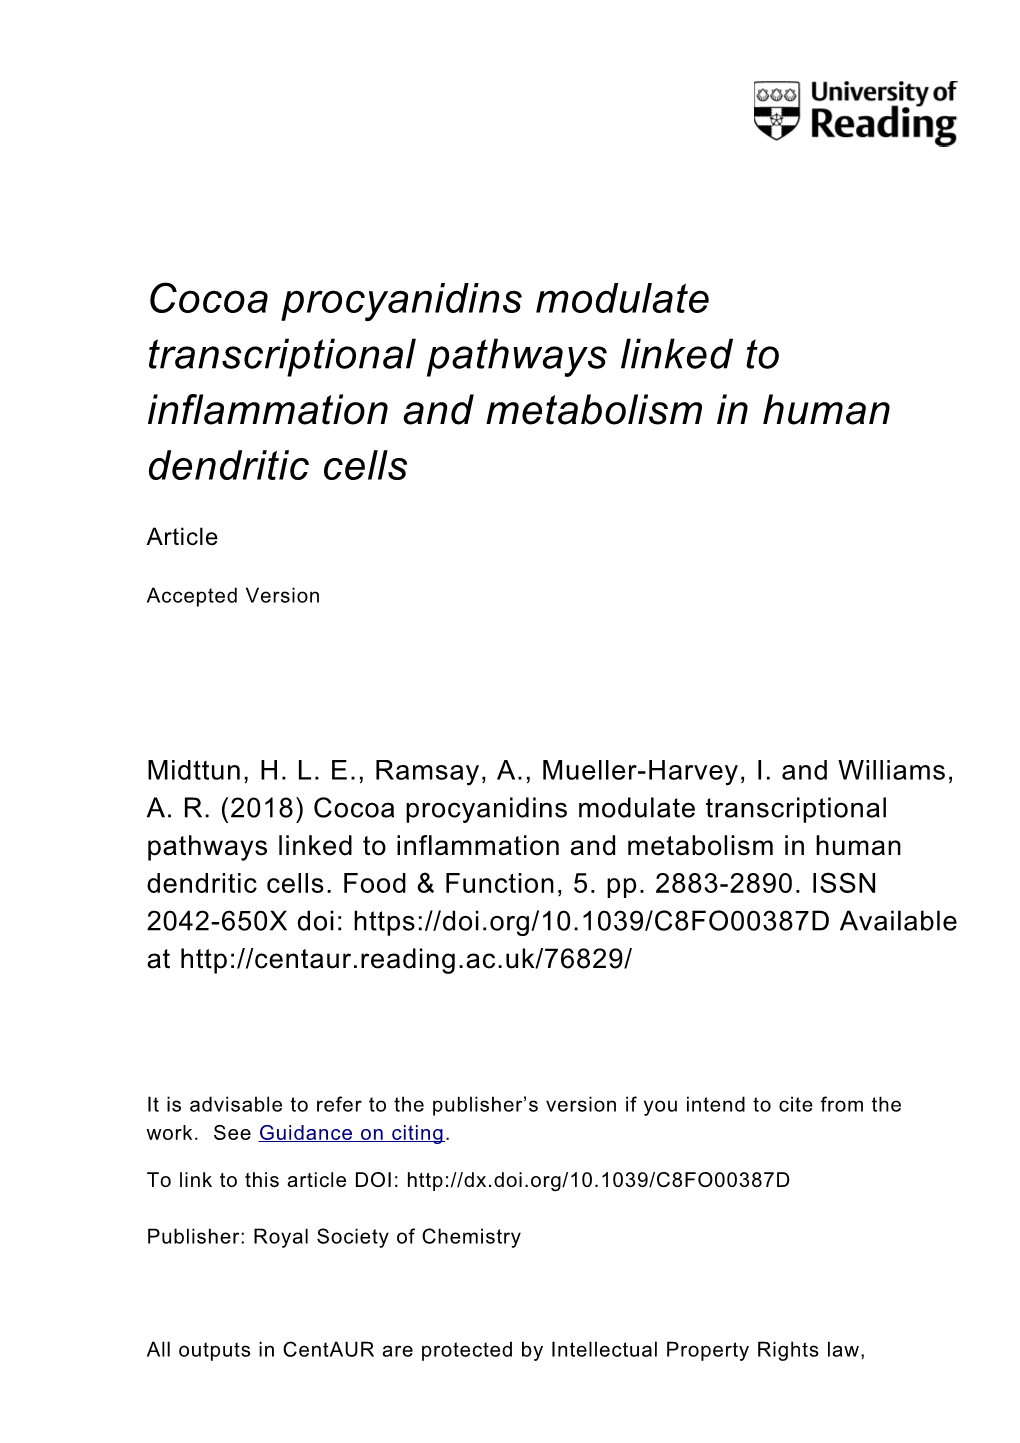 Cocoa Procyanidins Modulate Transcriptional Pathways Linked to Inflammation and Metabolism in Human Dendritic Cells